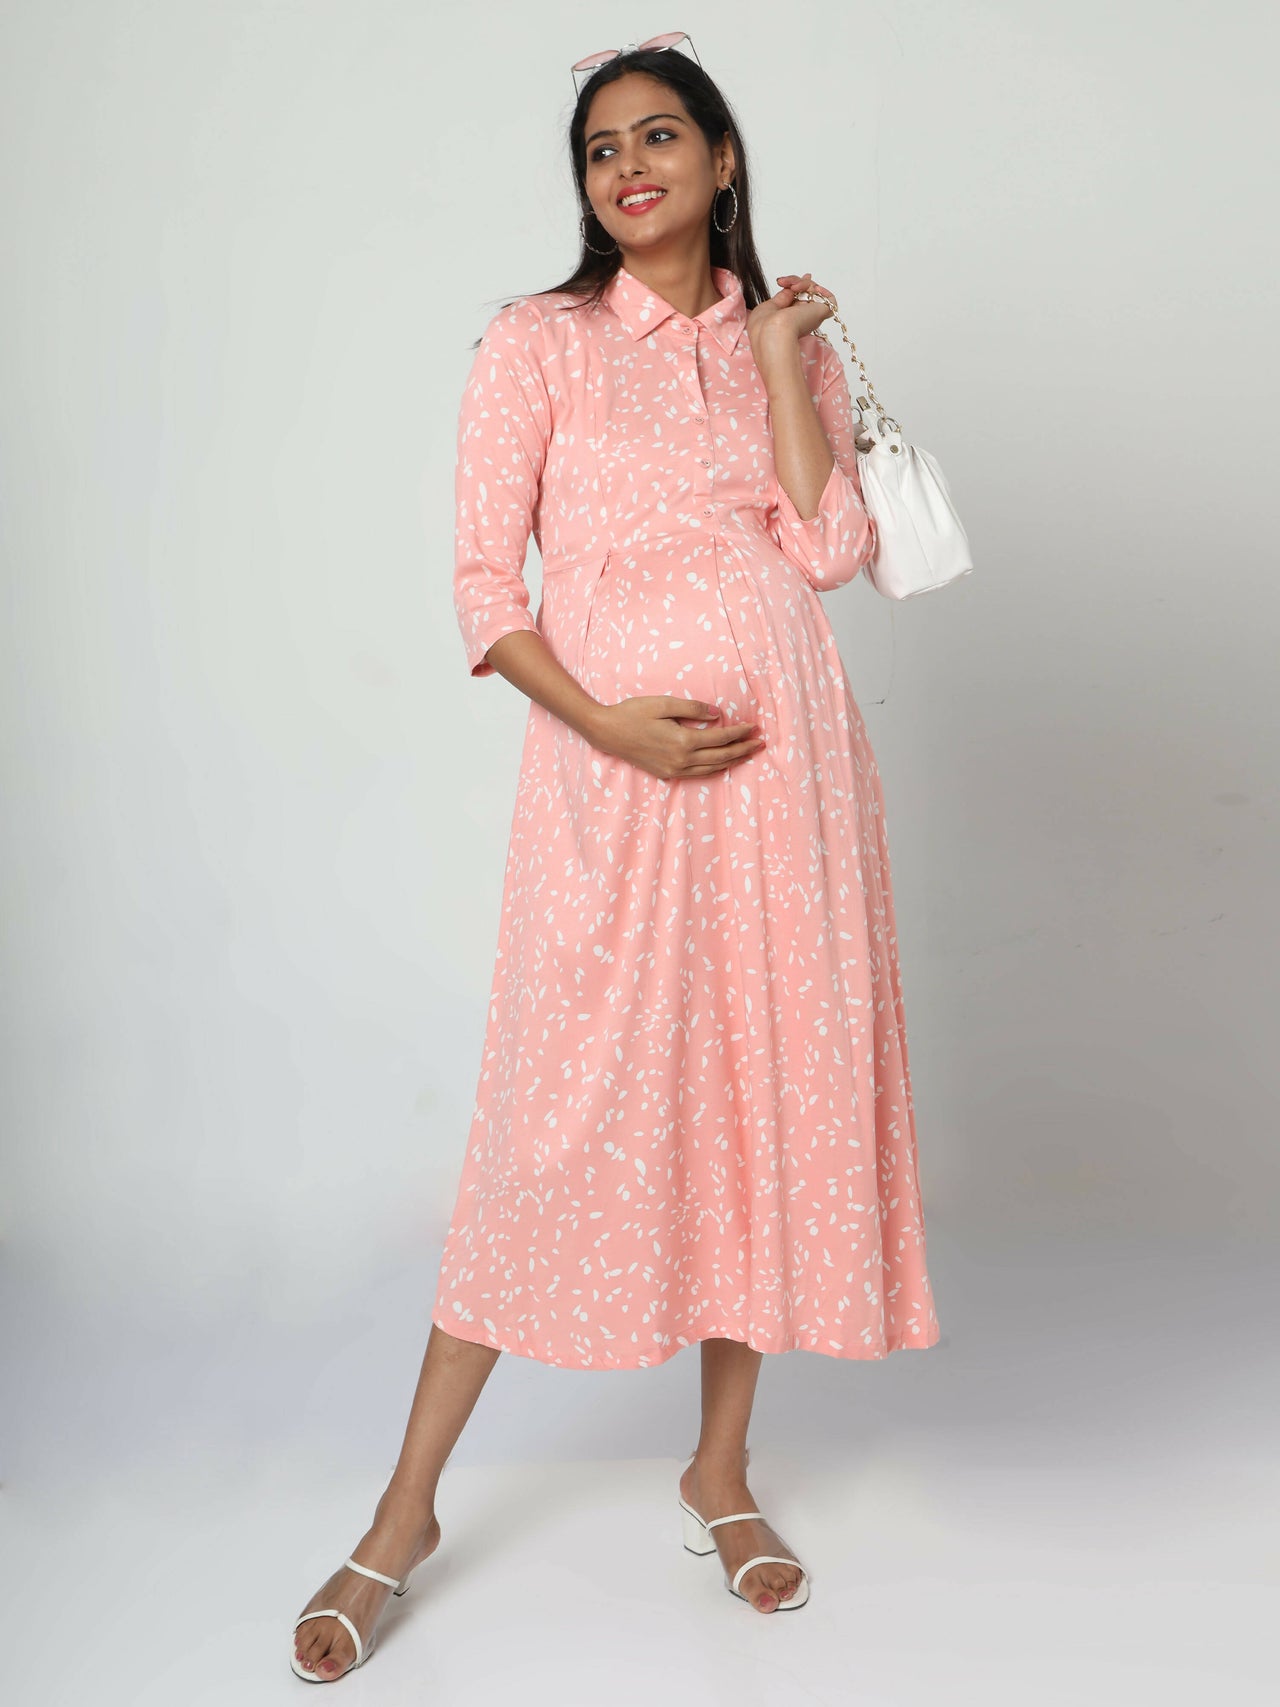 Manet Three Fourth Maternity Dress White Dot Print With Concealed Zipper Nursing Access - Pink - Distacart